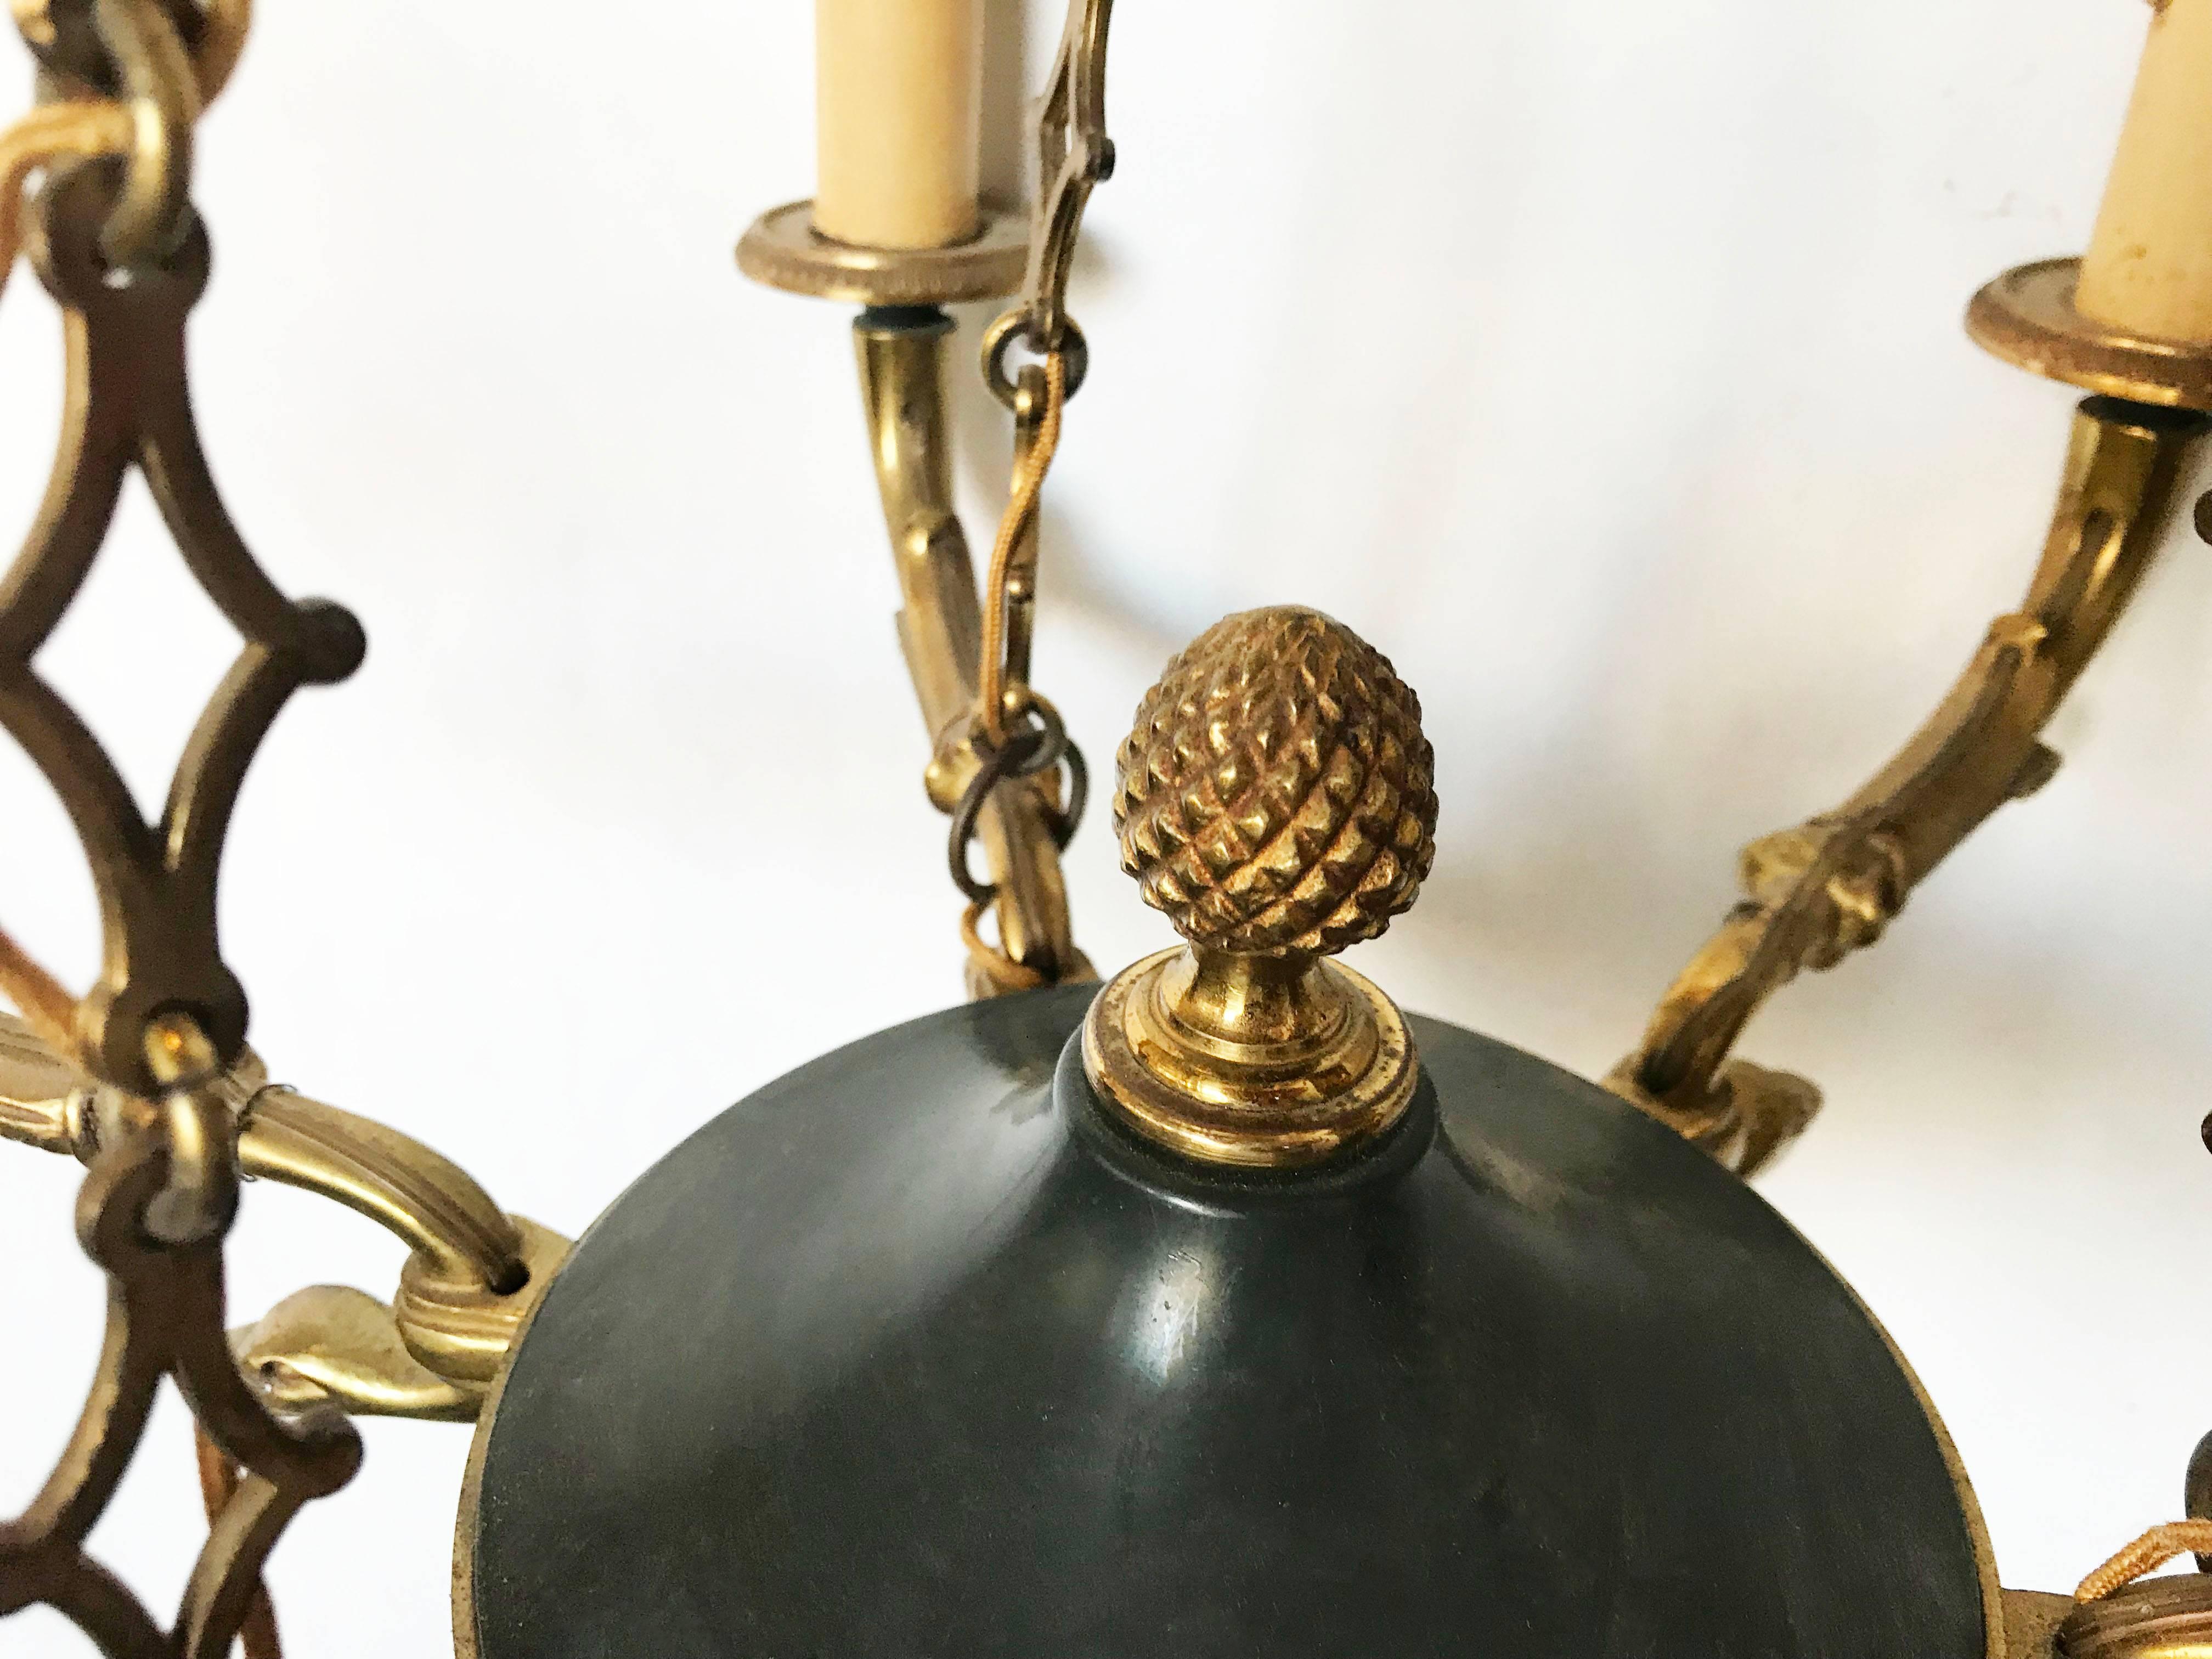 Elegant and heavy first French Empire style chandelier in Bronze made in France in the 1940.
Takes six lights 60 watts max per bulb.
Original patina, good vintage condition.